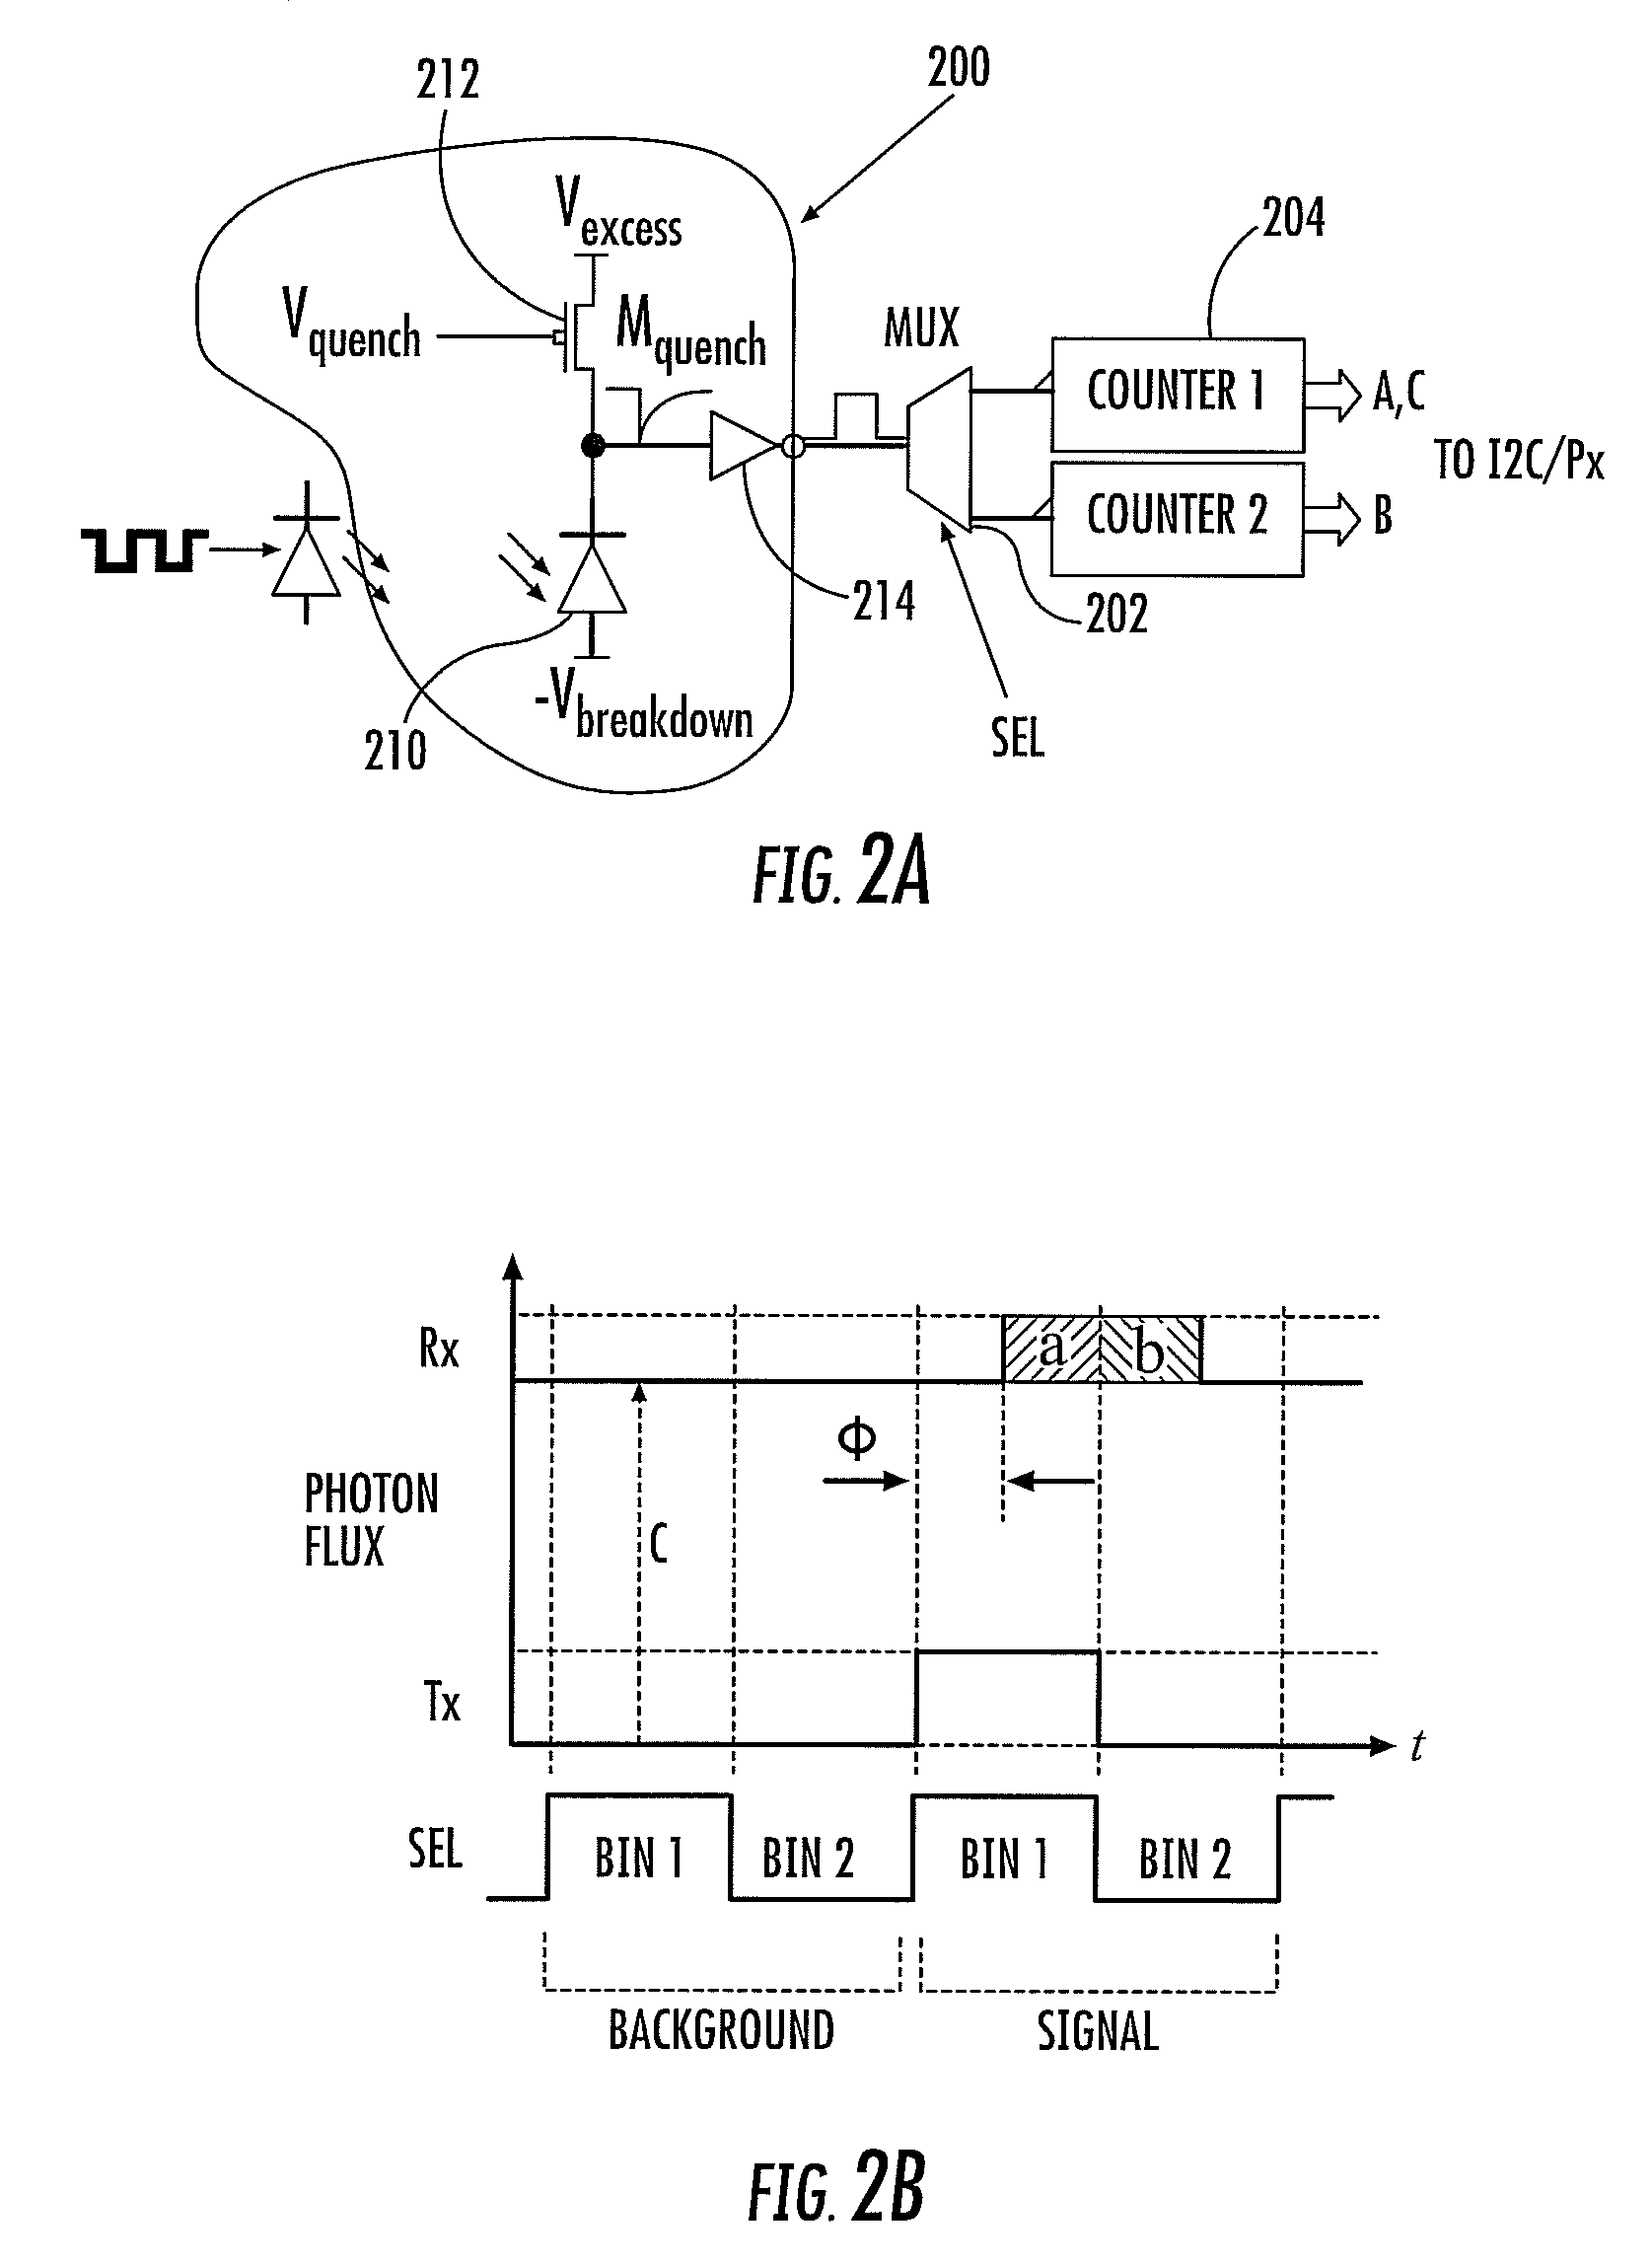 Application using a single photon avalanche diode (SPAD)